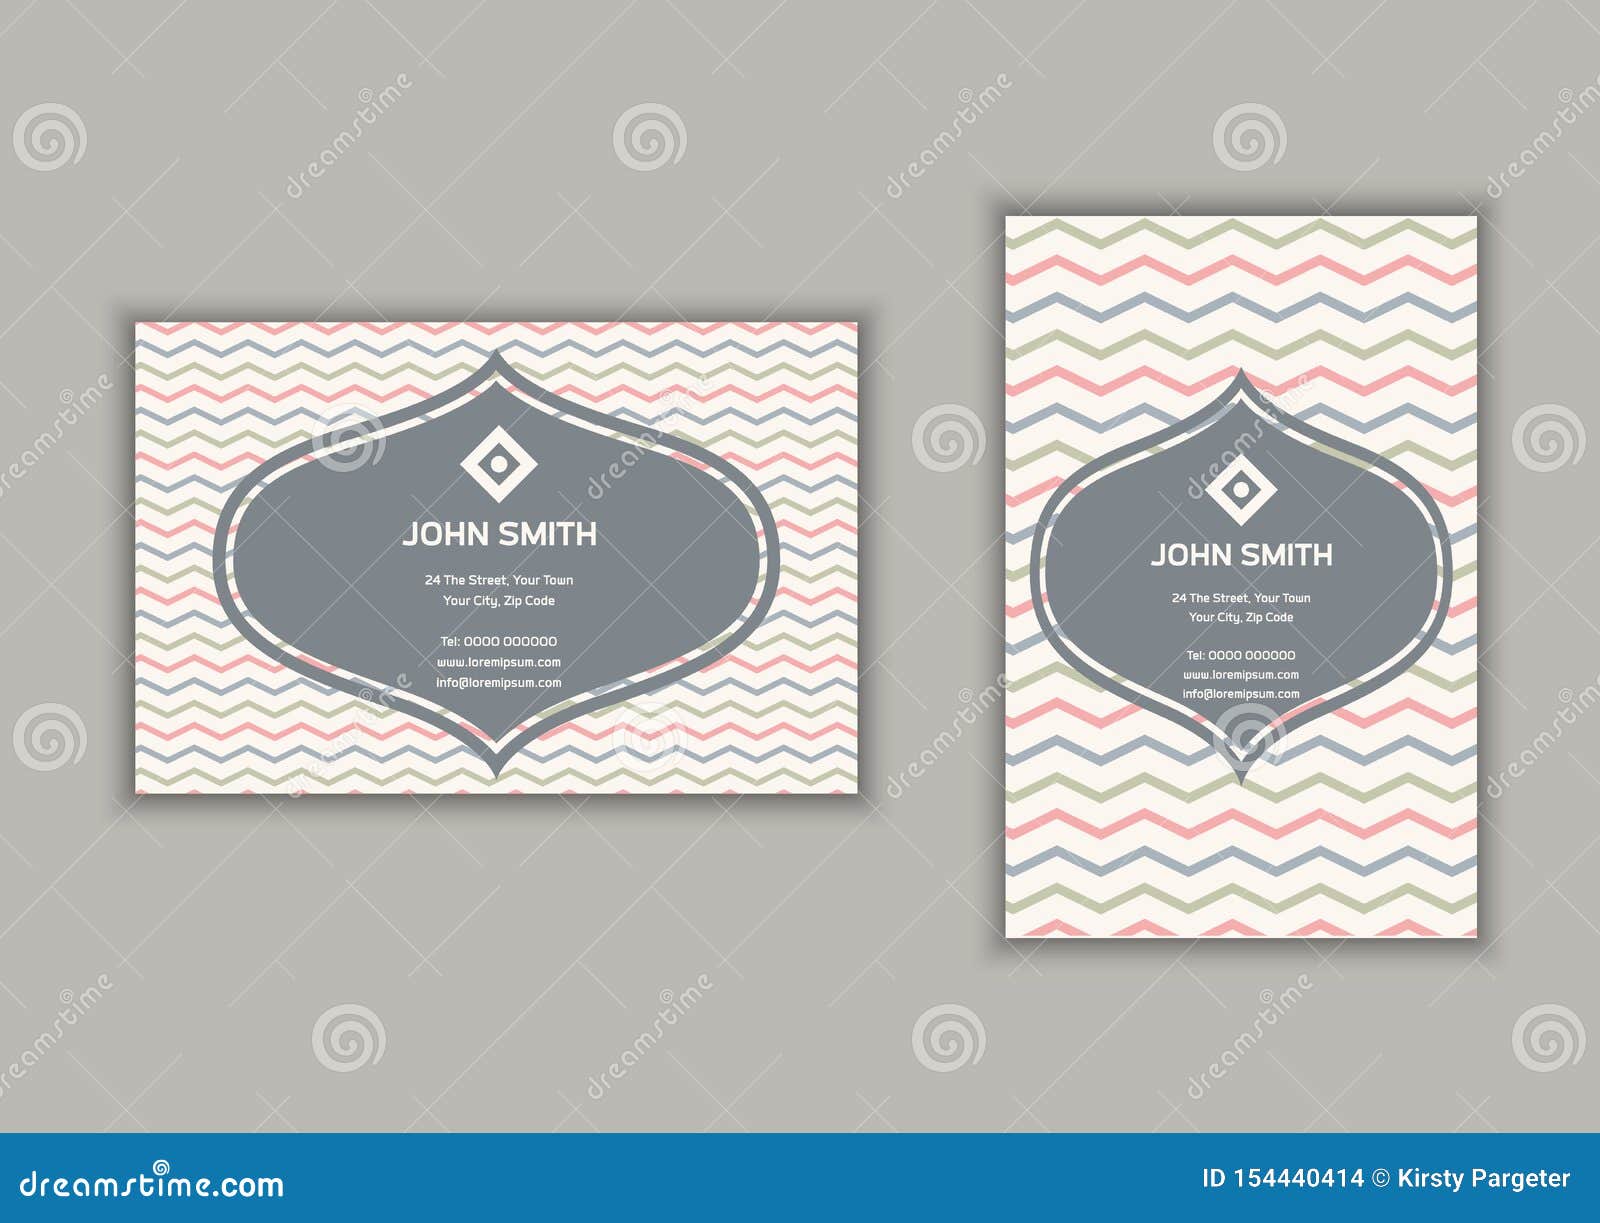 Business Card With Chevron Stripes Design In Portrait And Landscape Format Stock Vector Illustration Of Background Striped 154440414